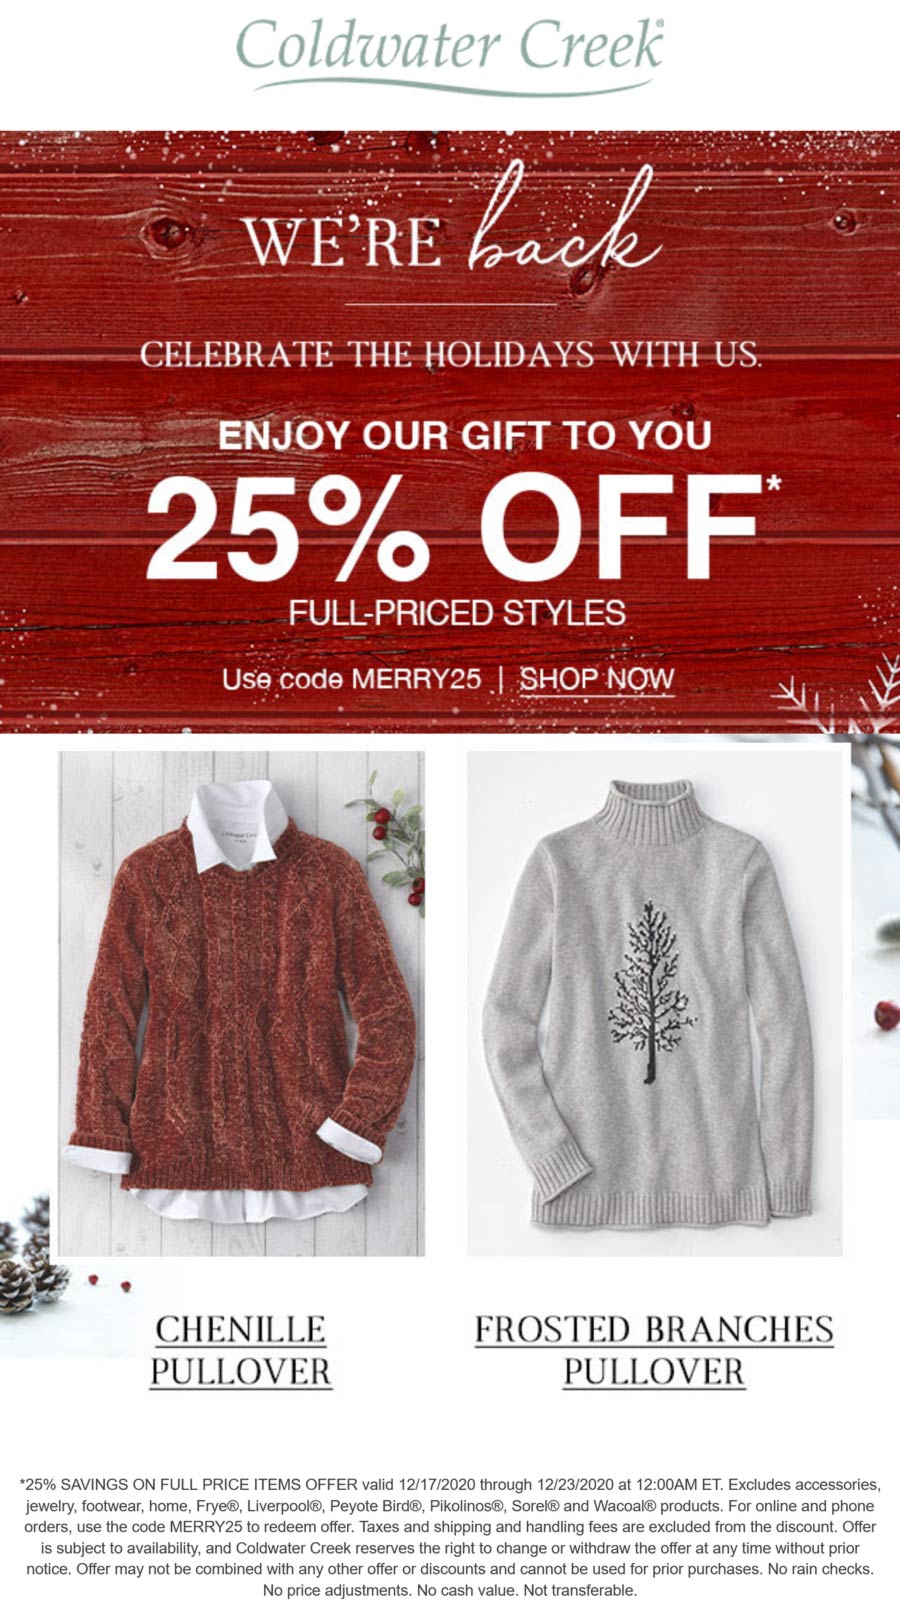 Coldwater Creek stores Coupon  25% off at Coldwater Creek via promo code MERRY25 #coldwatercreek 